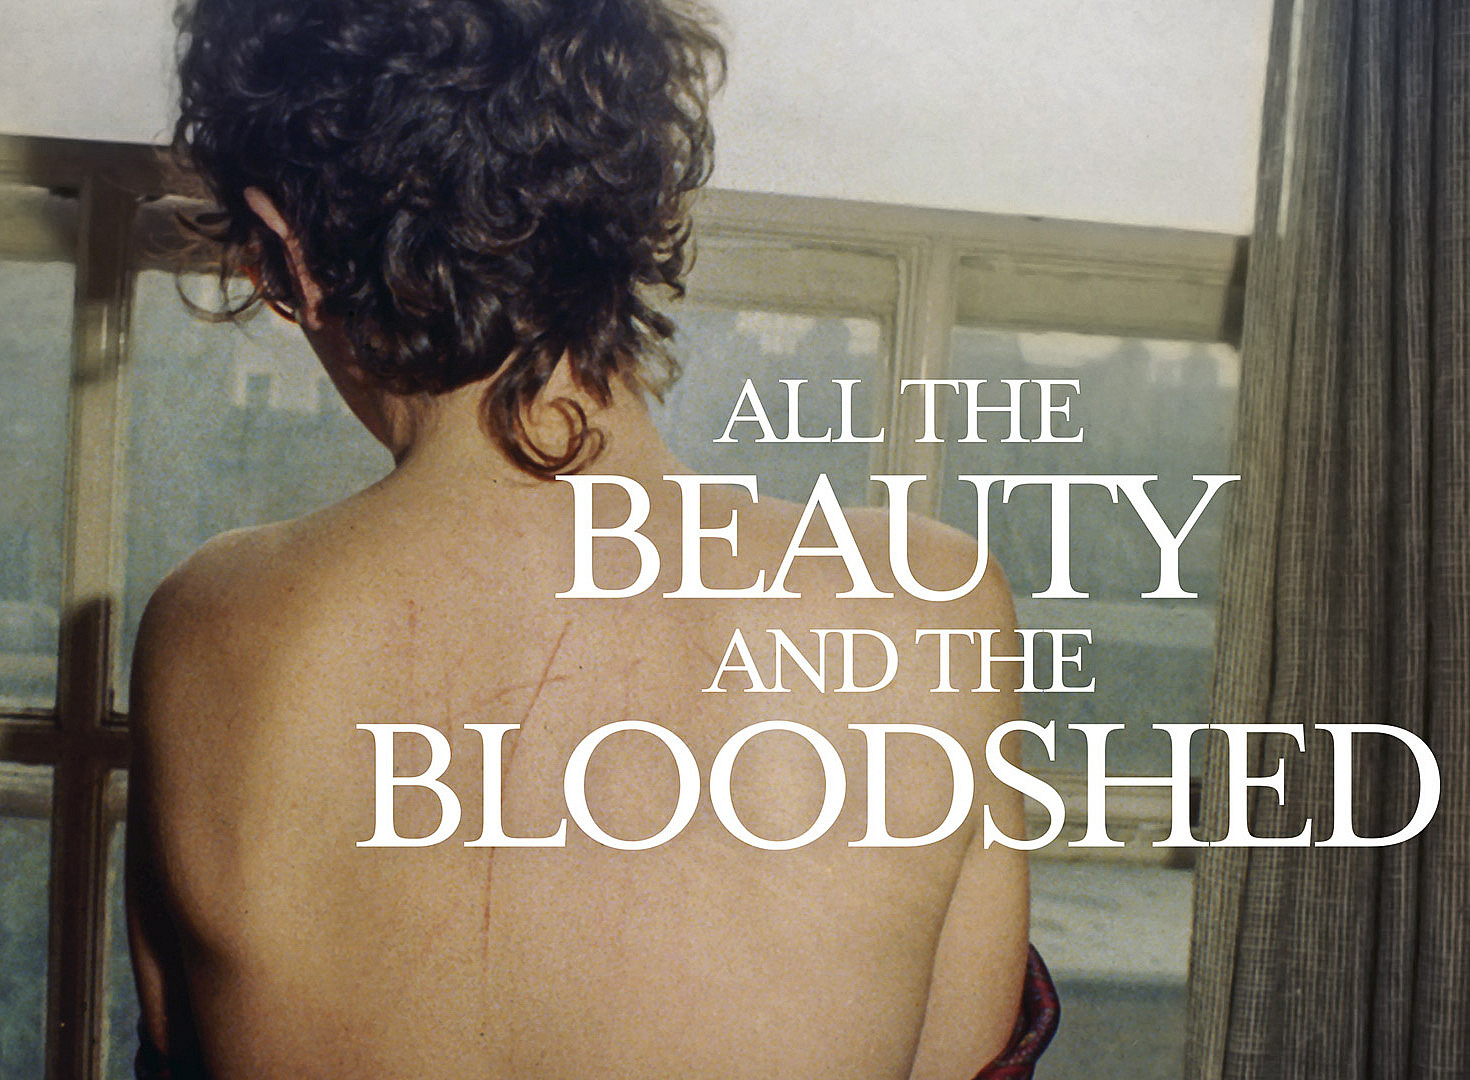 All the beauty and the bloodshed ©Laura Poitras & Nan Goldin